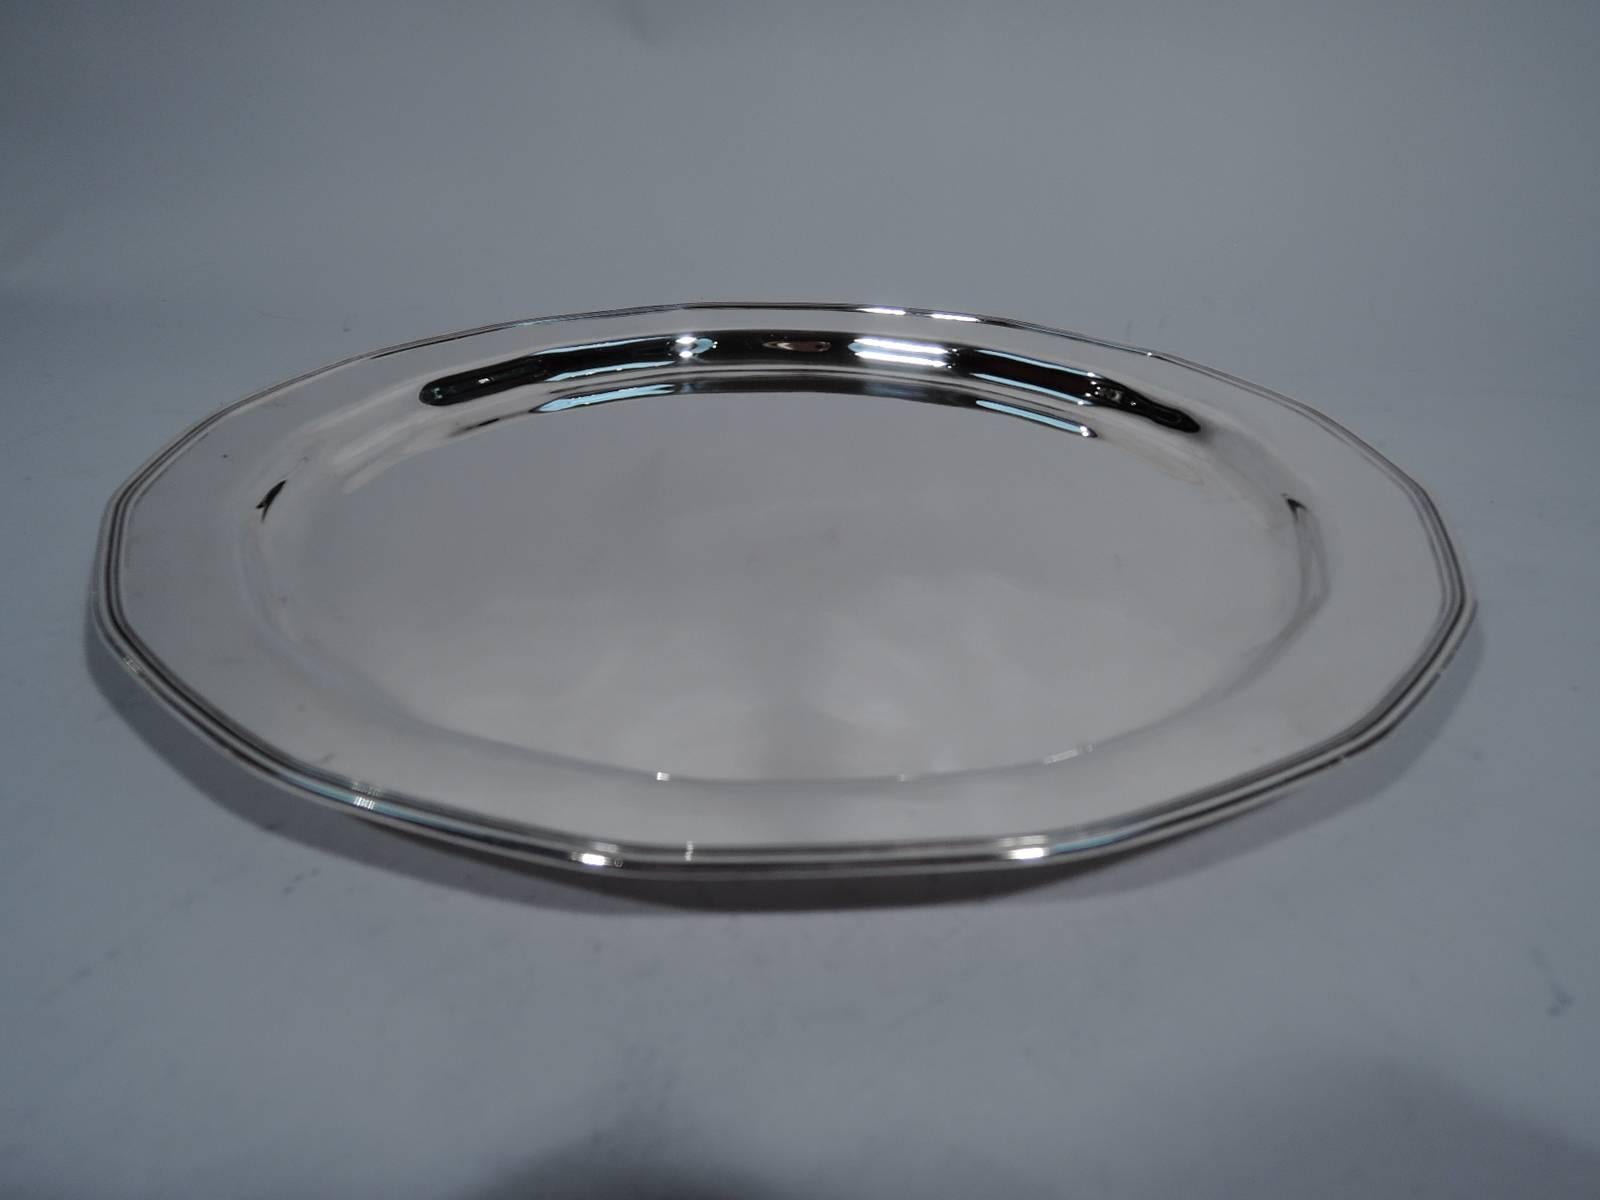 Modern sterling silver serving tray. Made by Tiffany & Co. in New York, circa 1911. Round with softly faceted well. Rim same with reeding. Hallmark includes pattern no. 18083 (first produced in 1911) and director’s letter m (1907-47). Very good